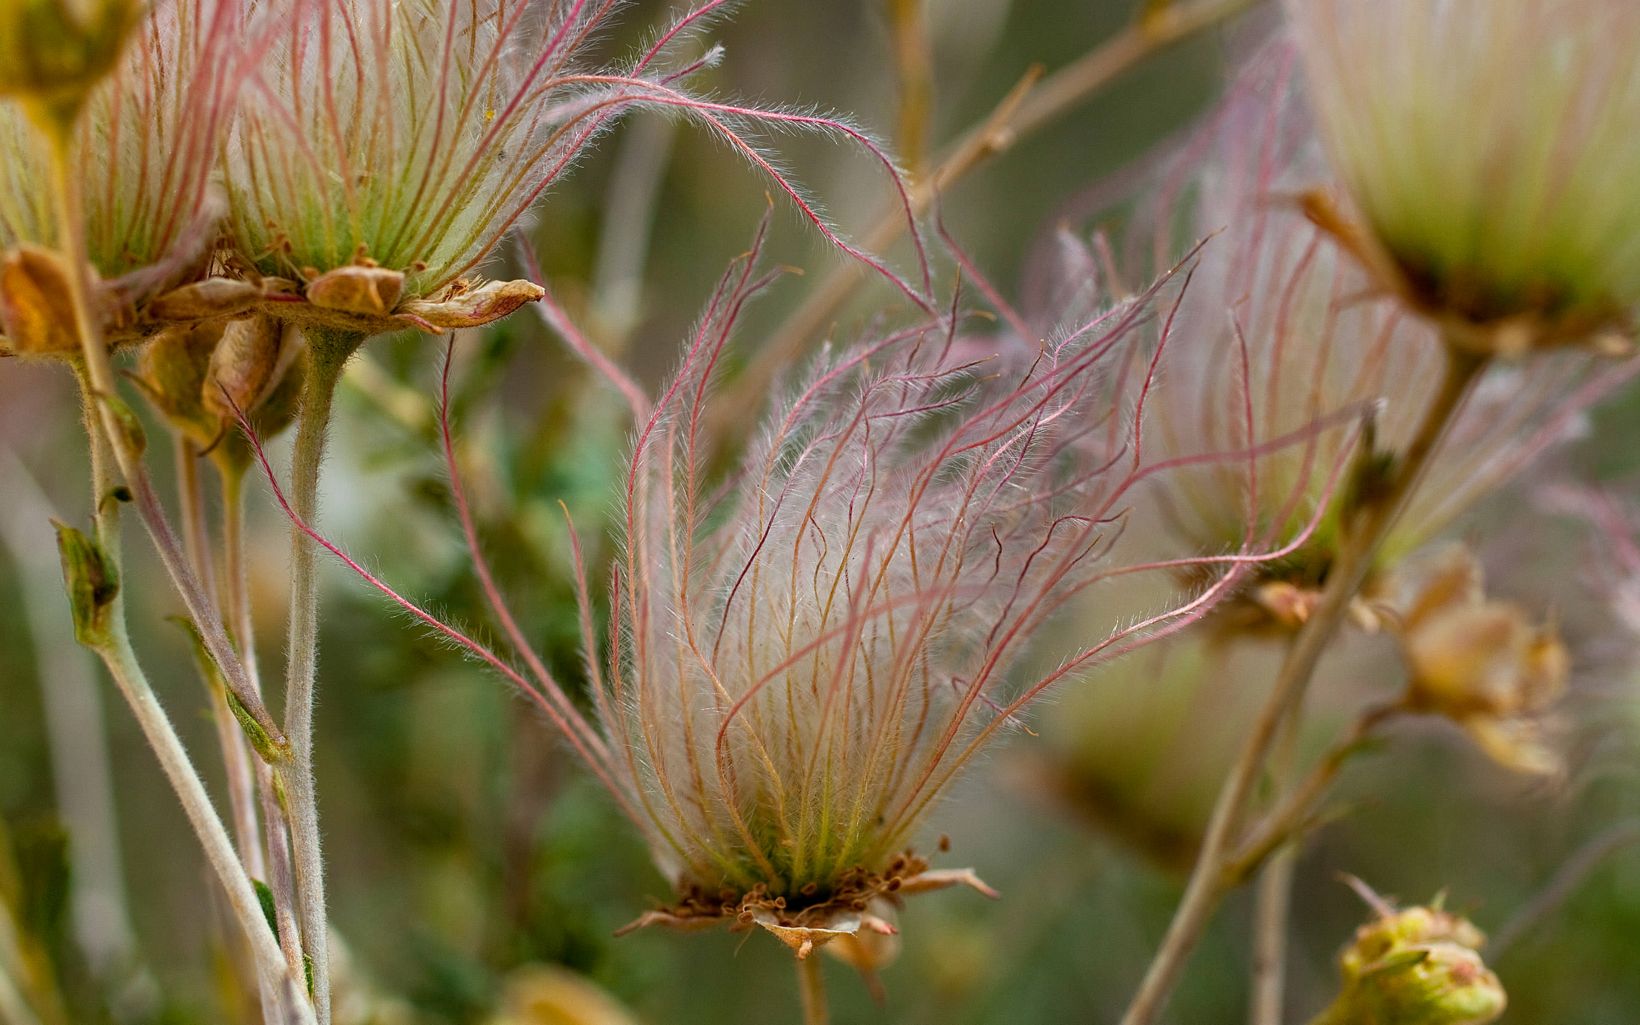 A macro image of flowers with feathery pink flowers.